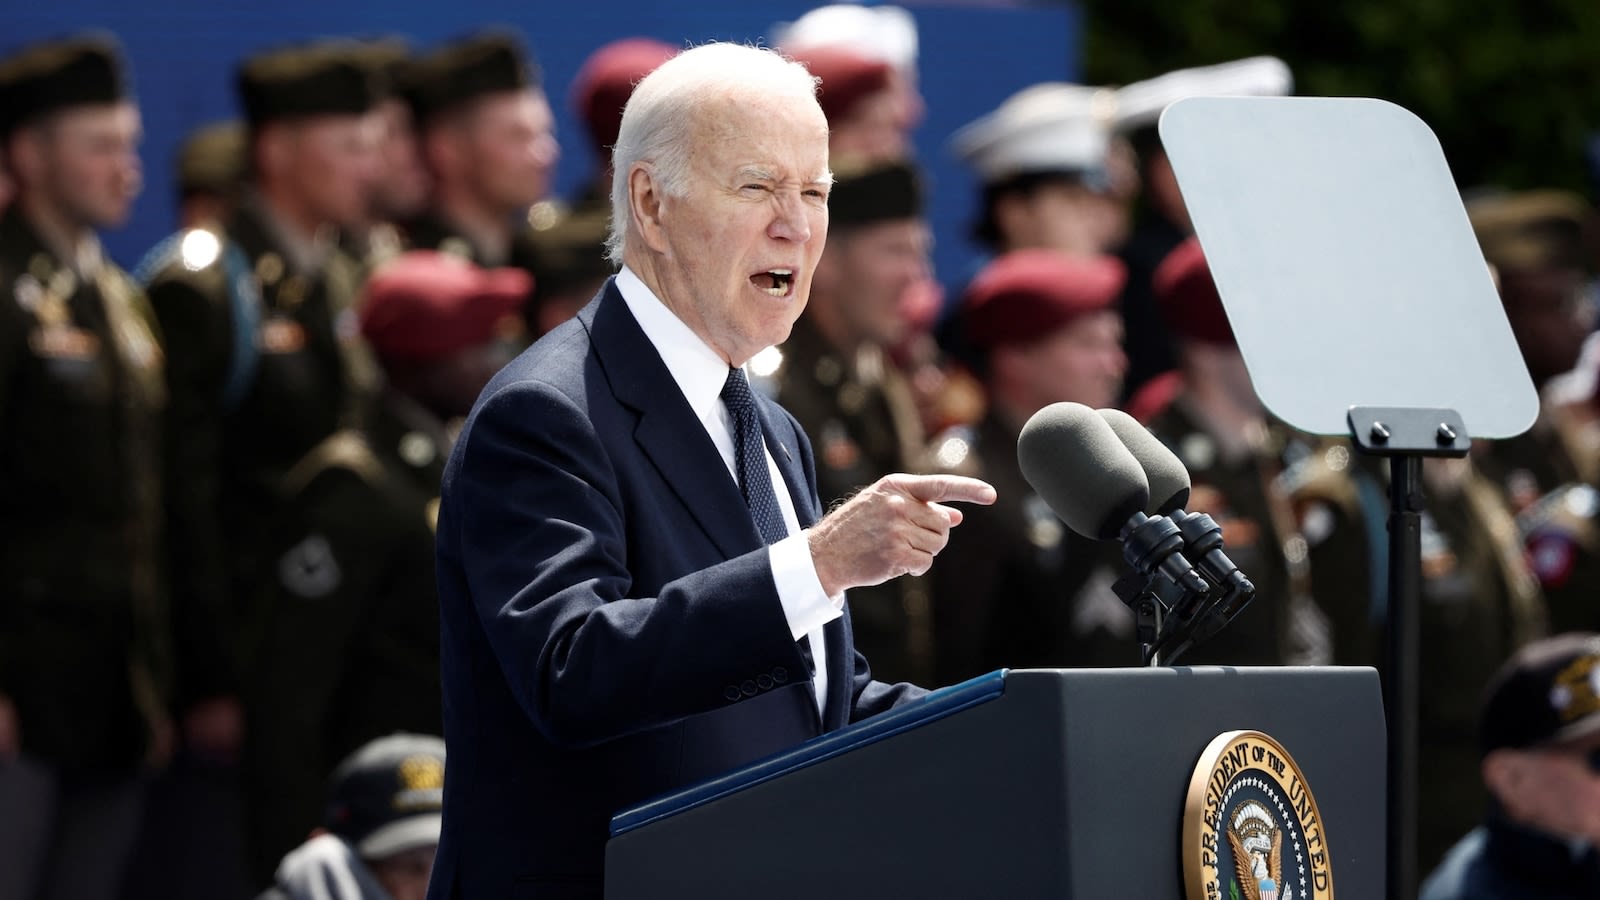 Biden to offer forceful defense of democracy in Normandy speech commemorating D-Day